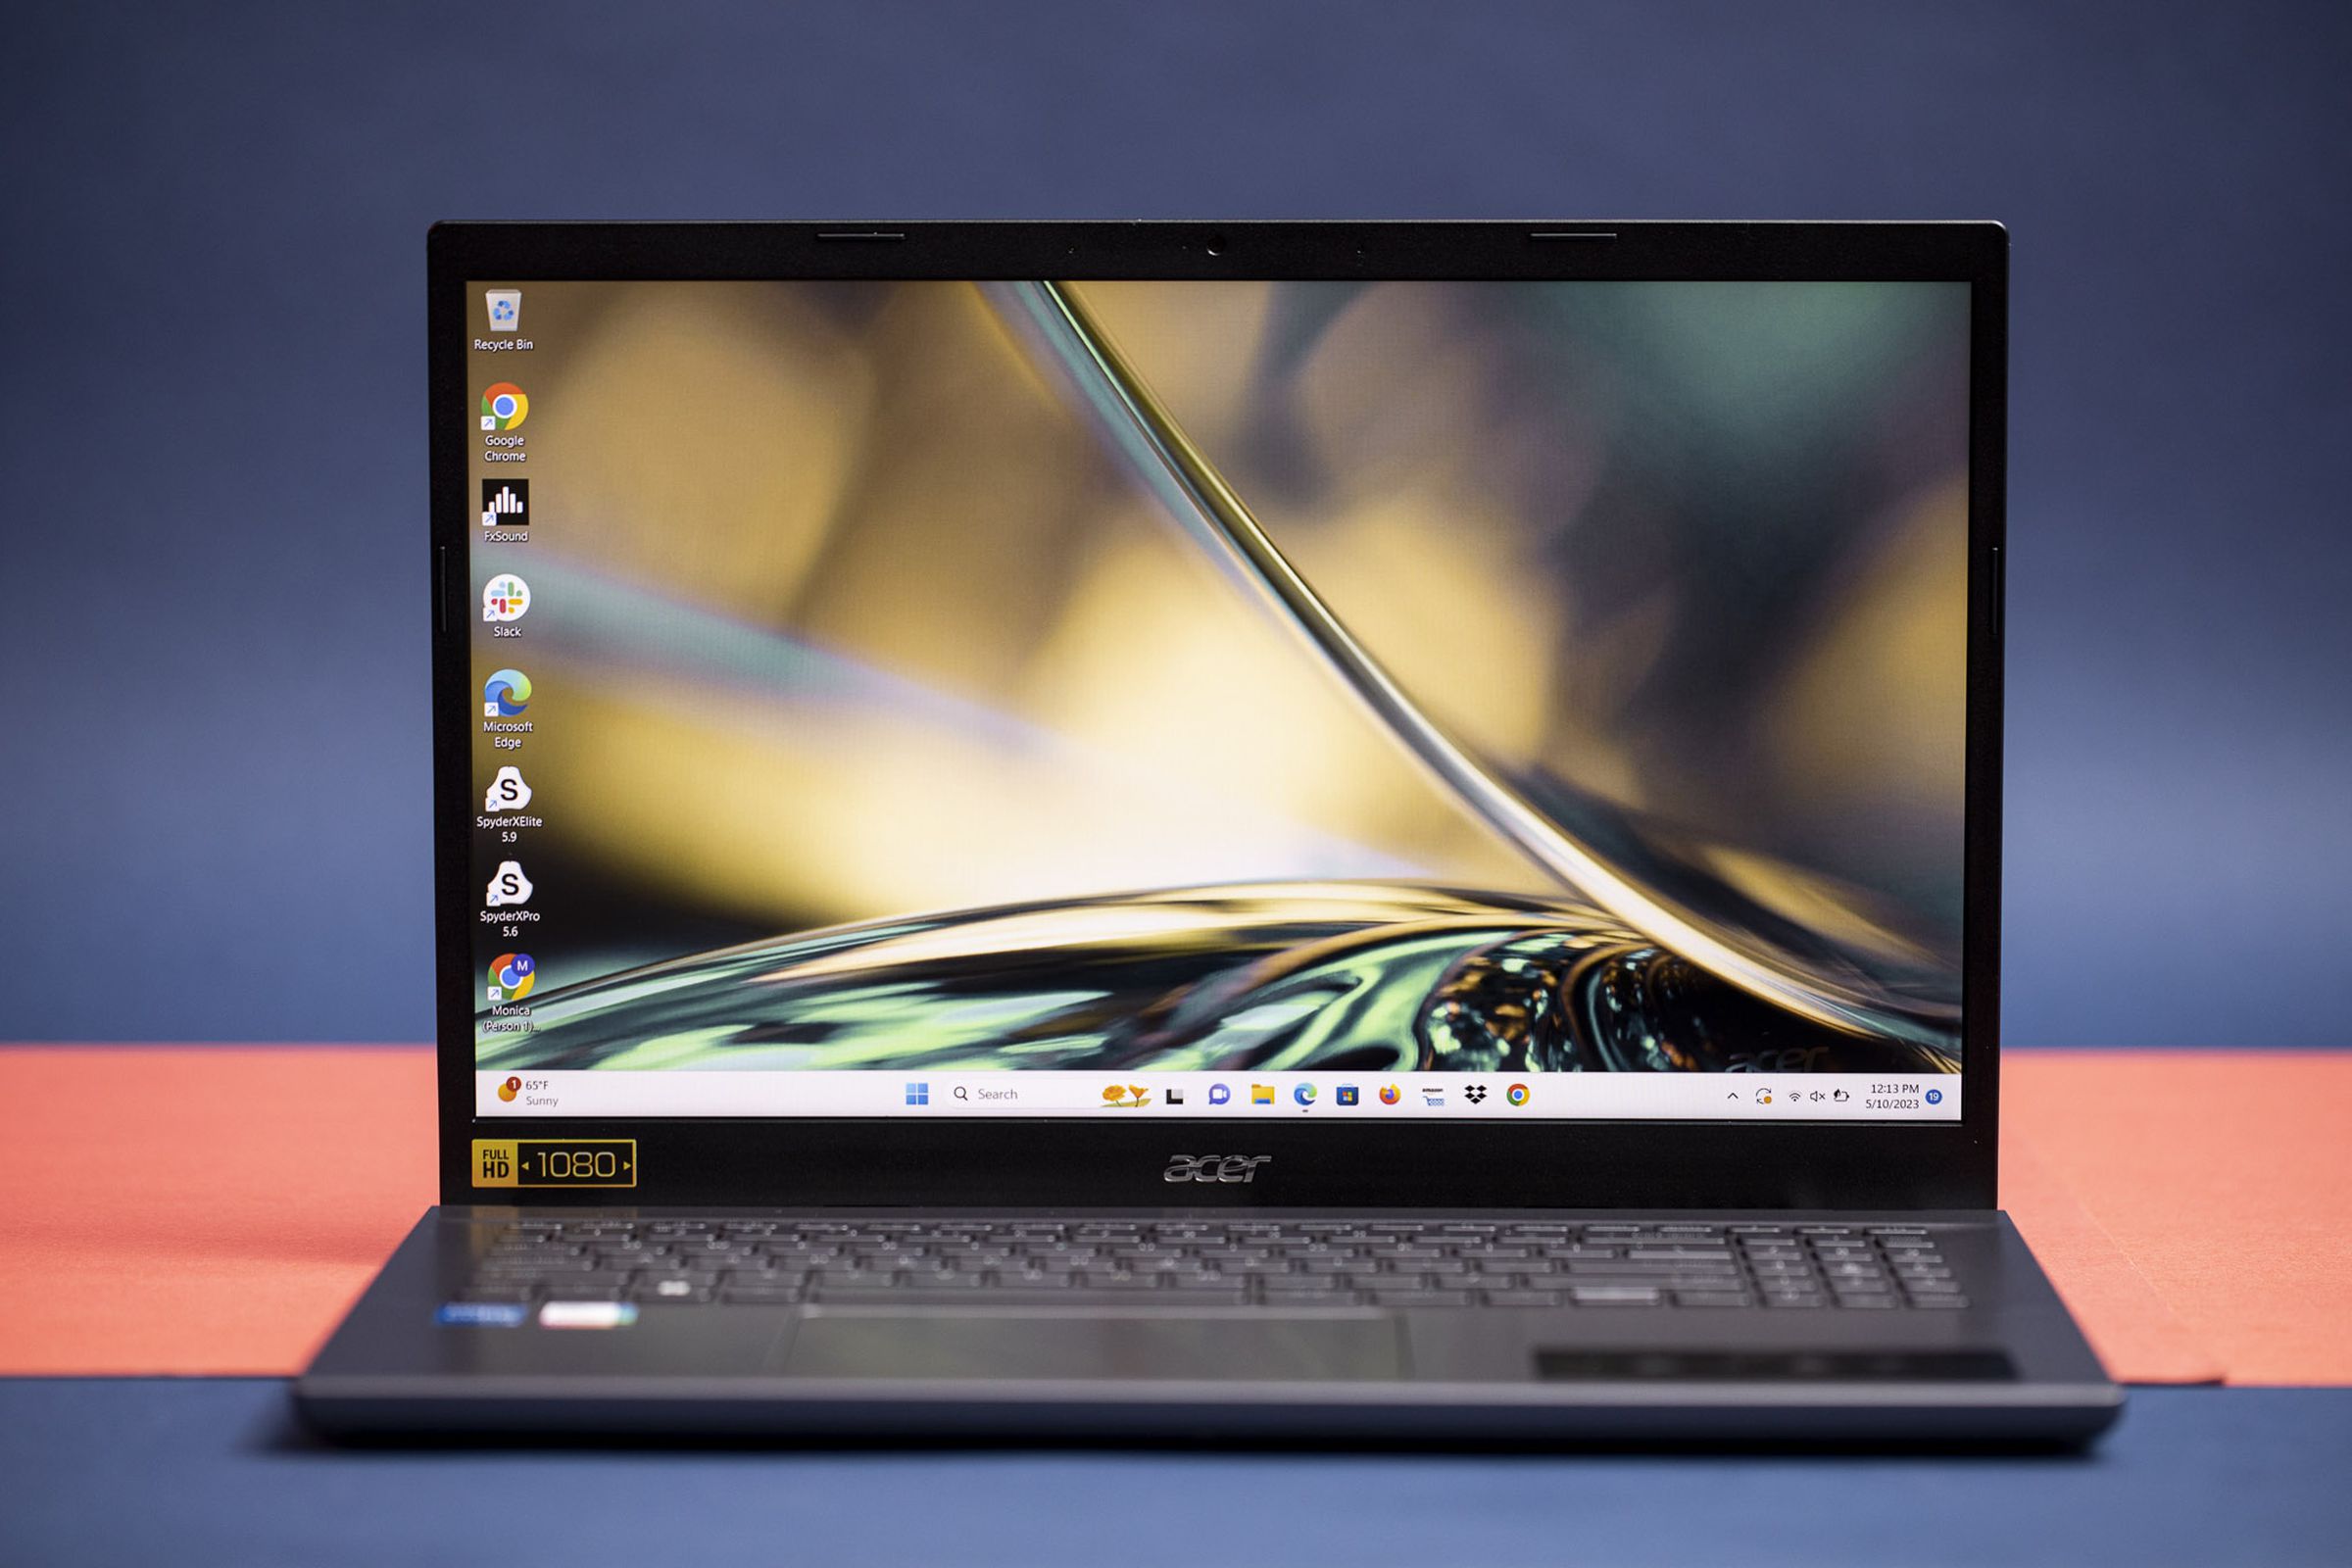 The Acer Aspire 5 displaying a green desktop background.